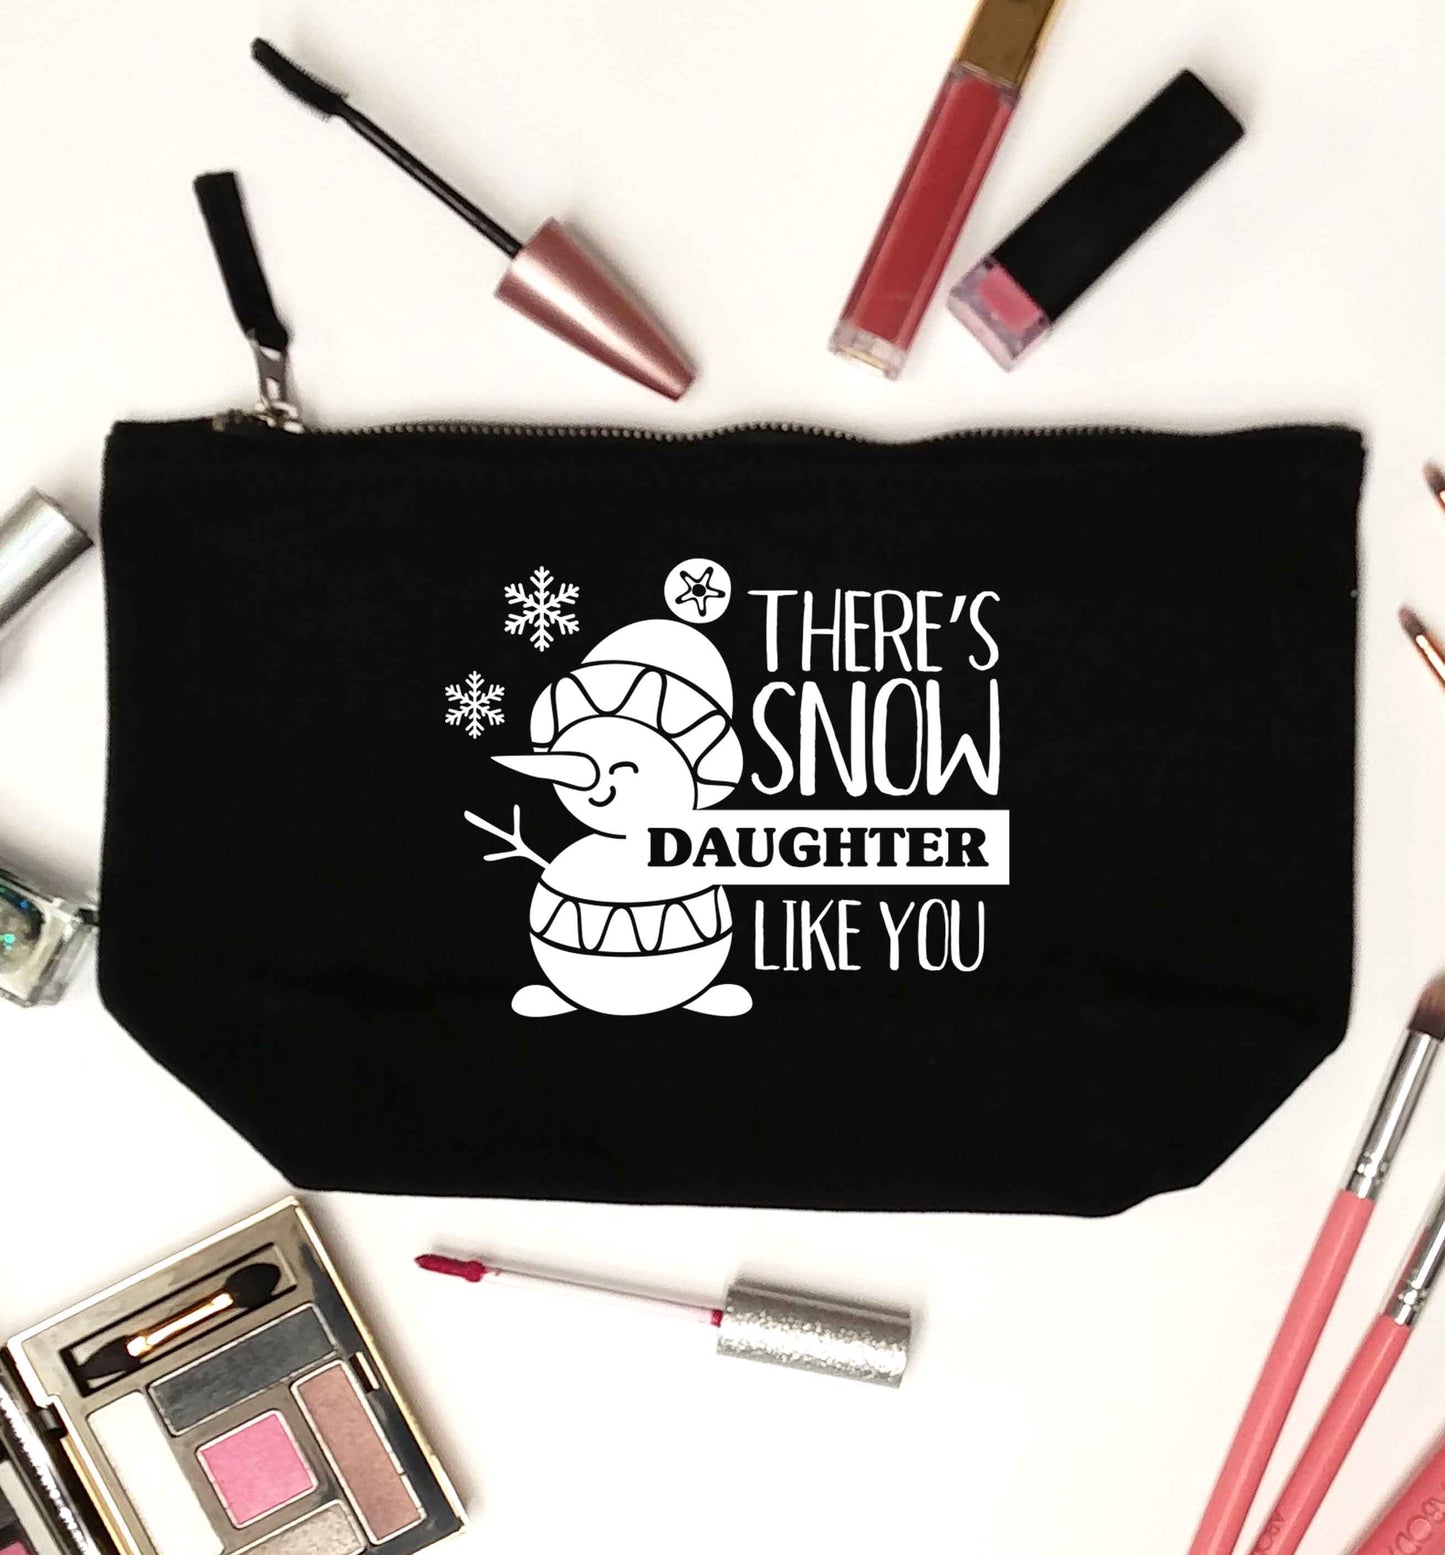 There's snow daughter like you black makeup bag